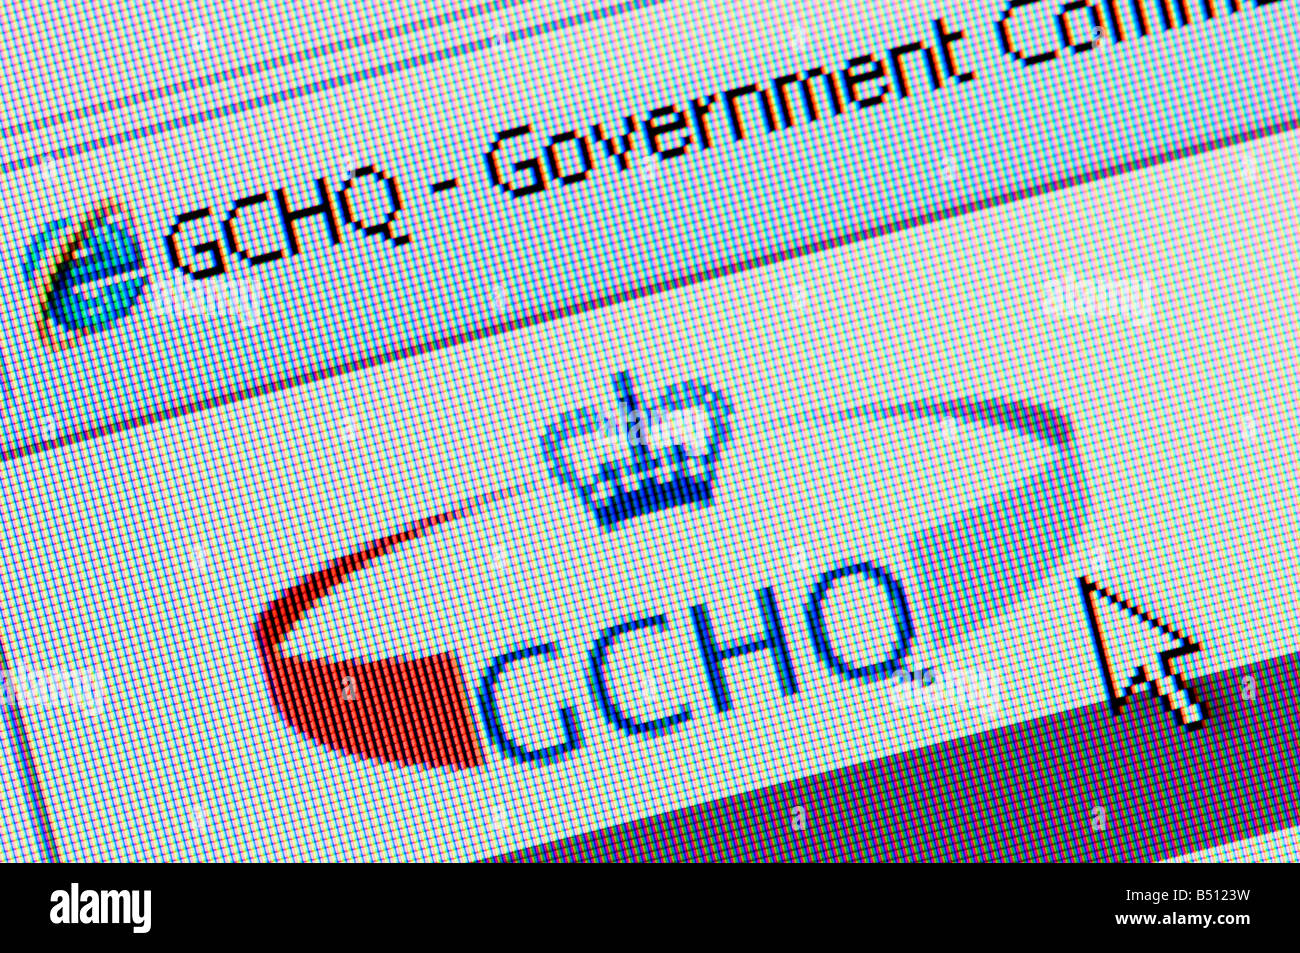 Macro screenshot of GCHQ UK government communications website Editorial use only Stock Photo